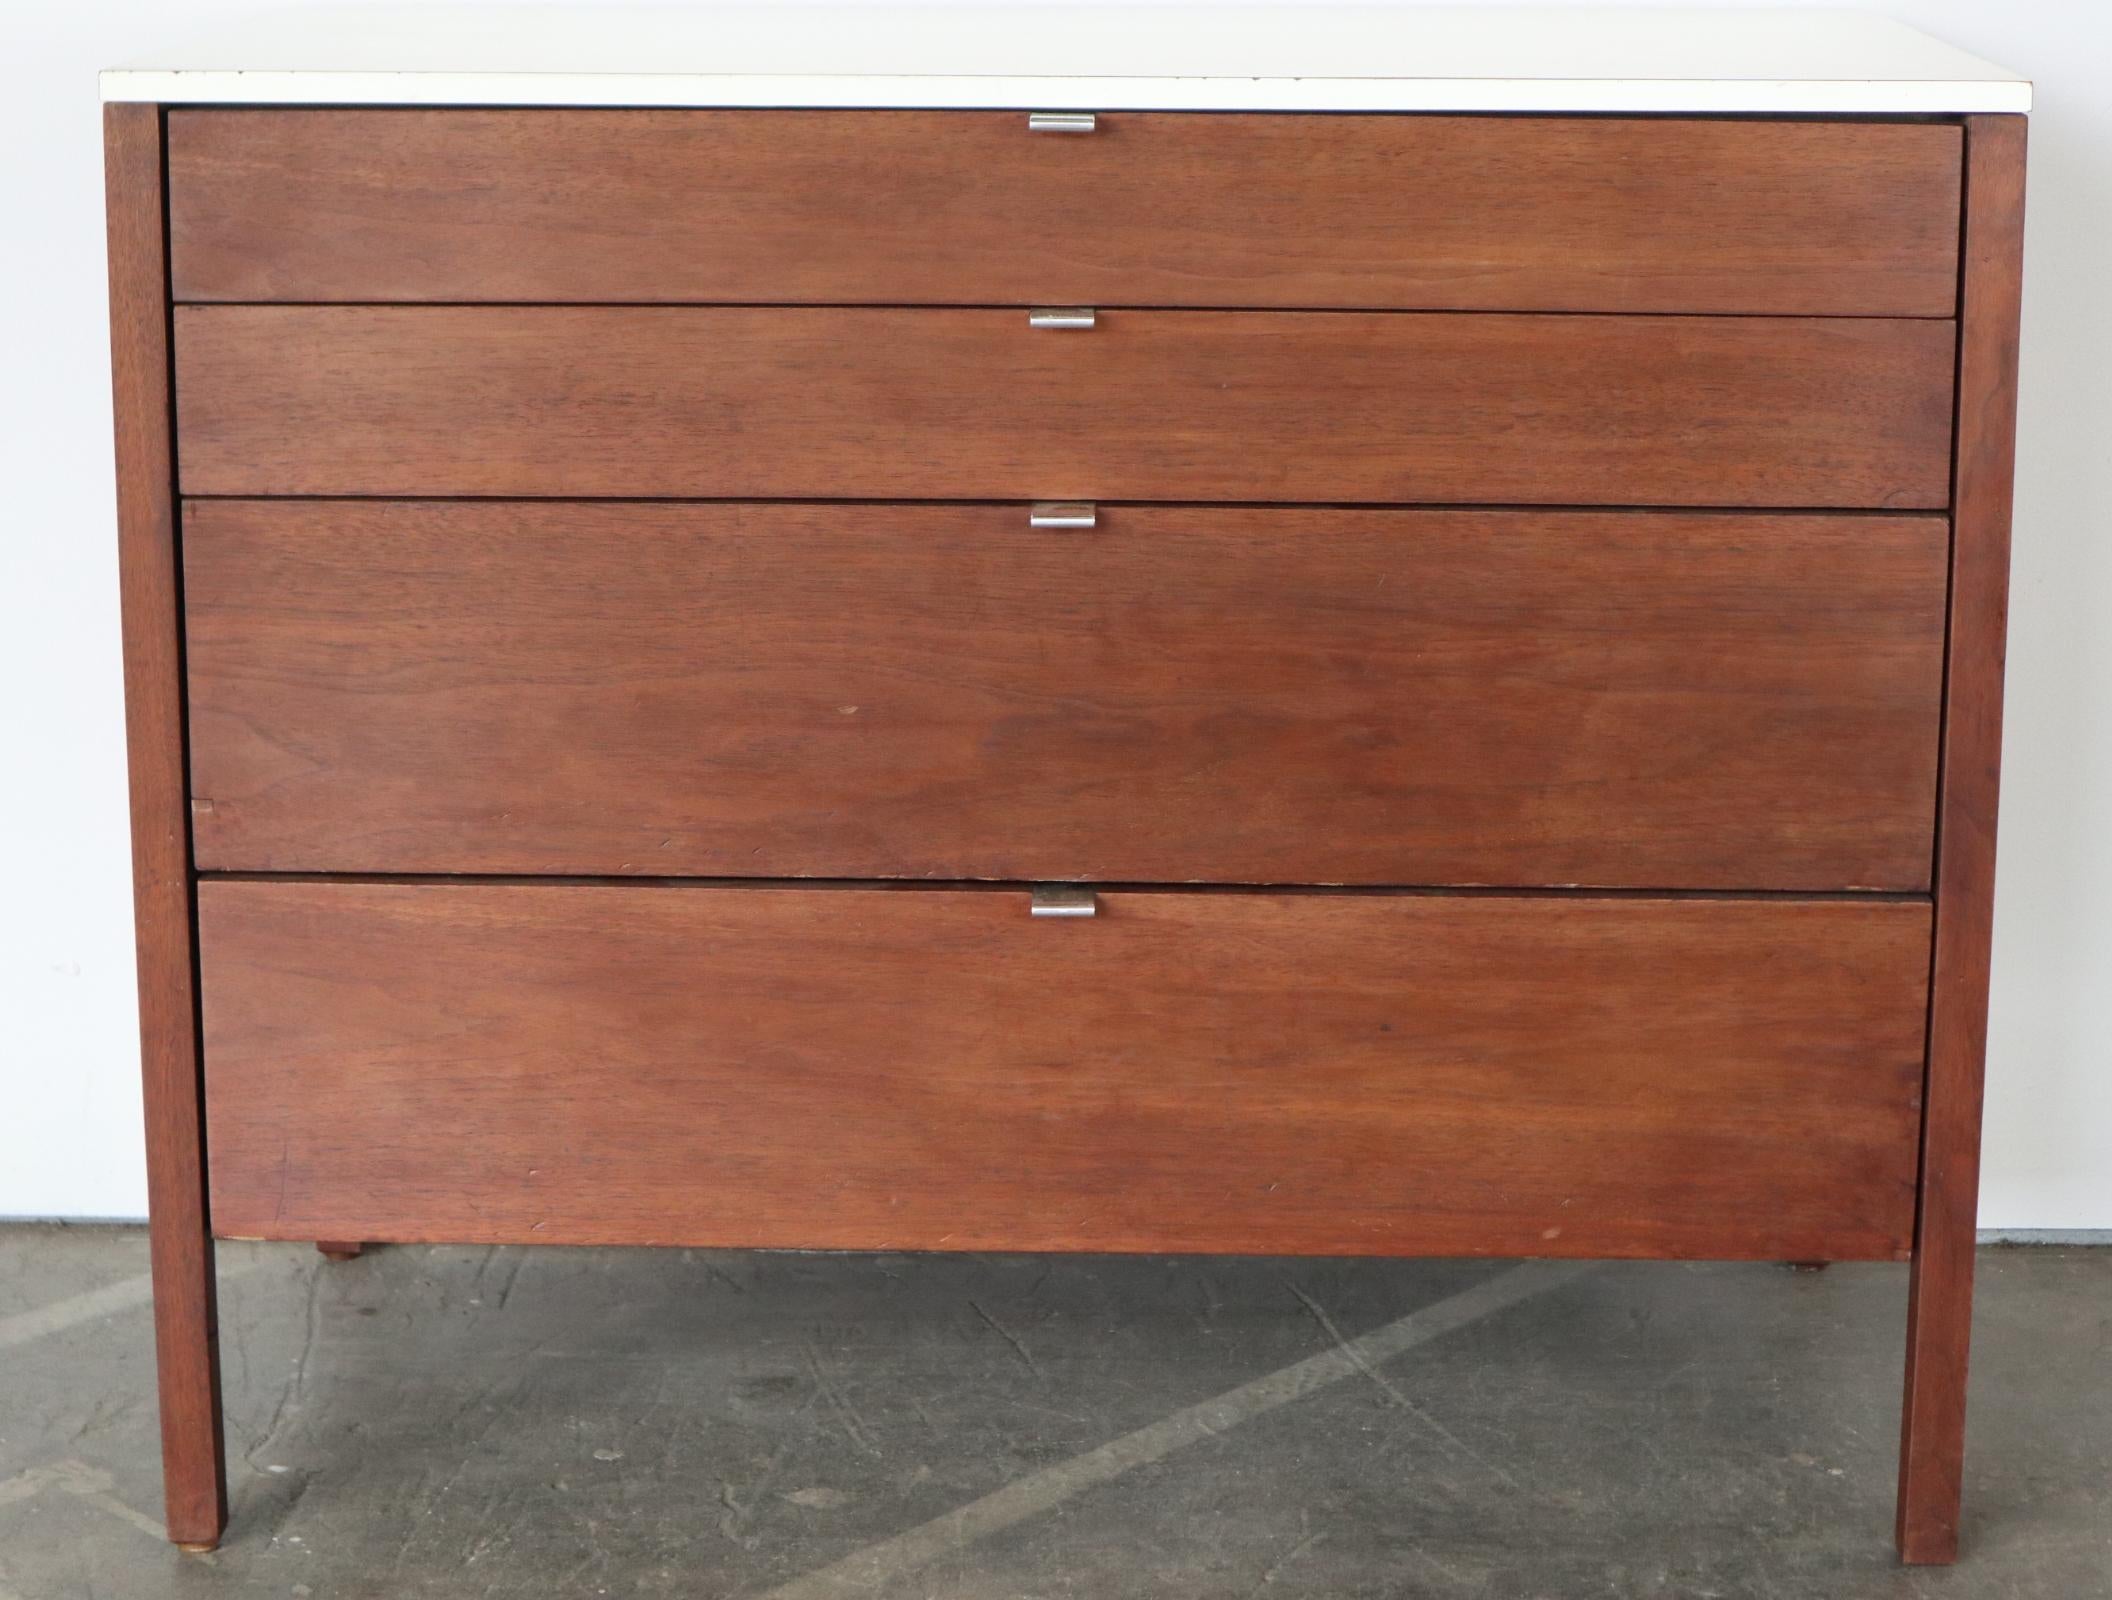 Early Florence Knoll dresser in walnut and laminate top. Wood refinished and is stunning. Original pulls and bow tie label. Drawers function smoothly. Top in great shape for the age. Minor wear. Presents very well.